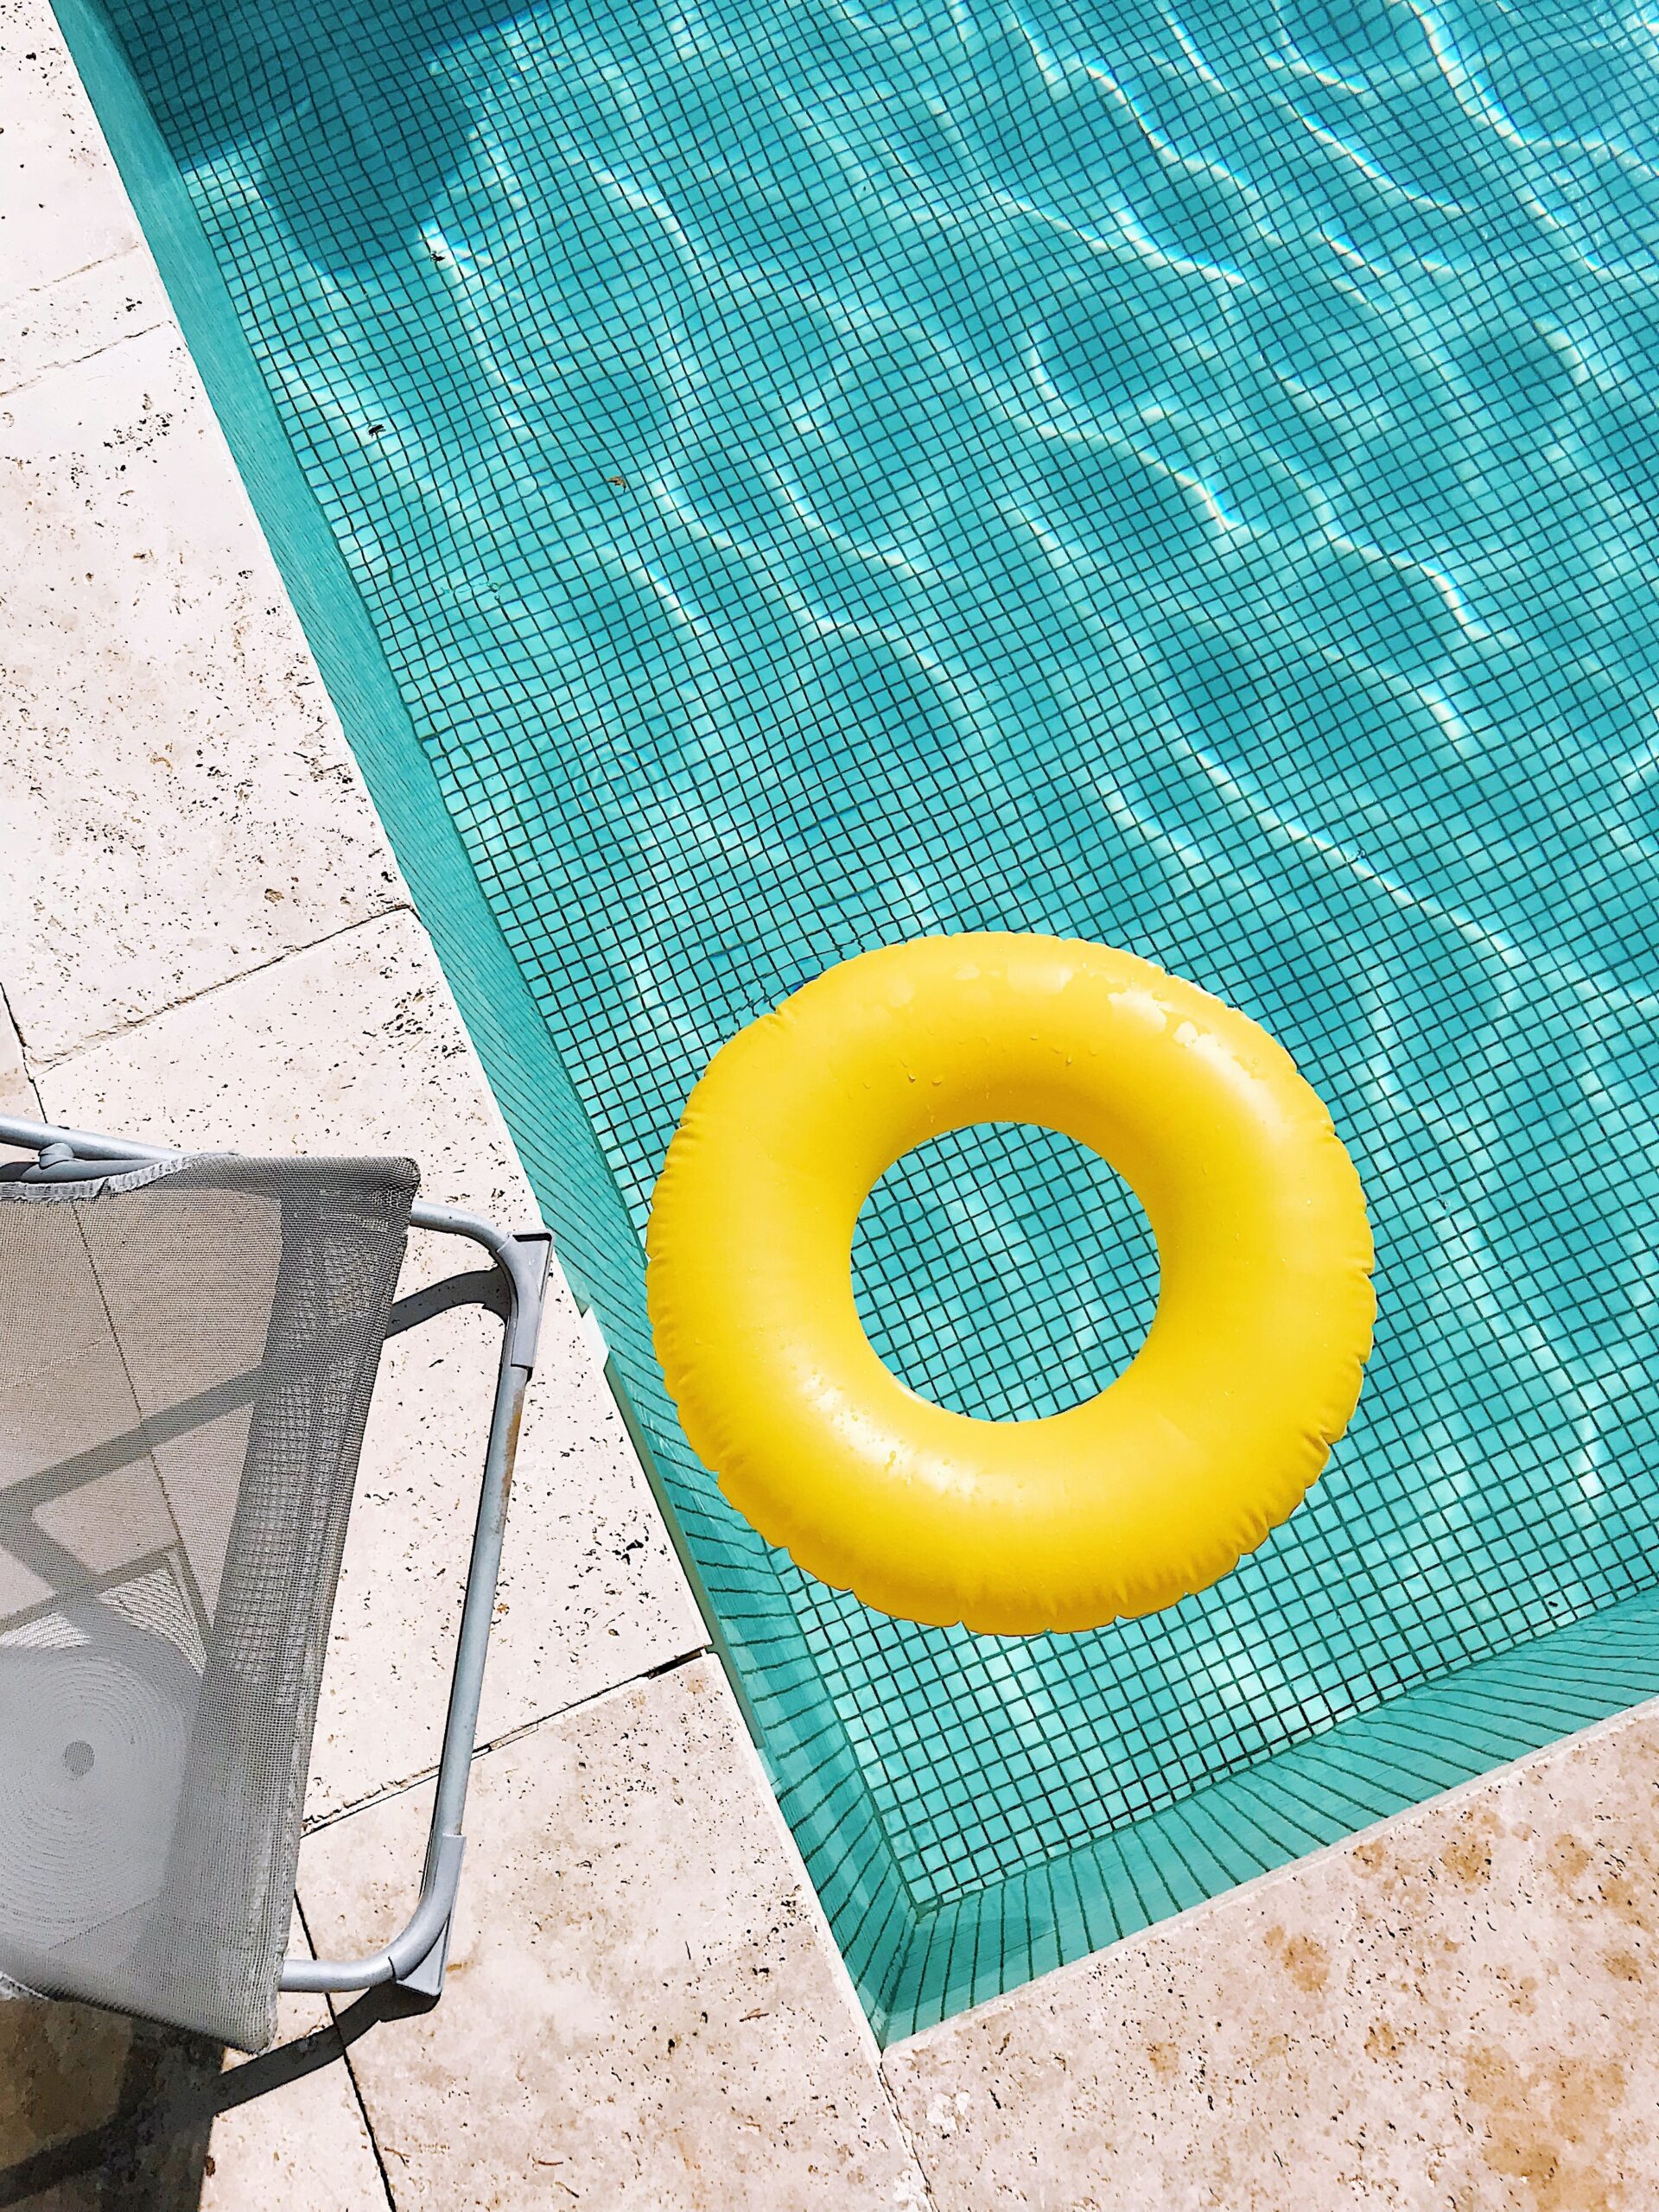 Should You Take Down Your Above Ground Pool Every Year?